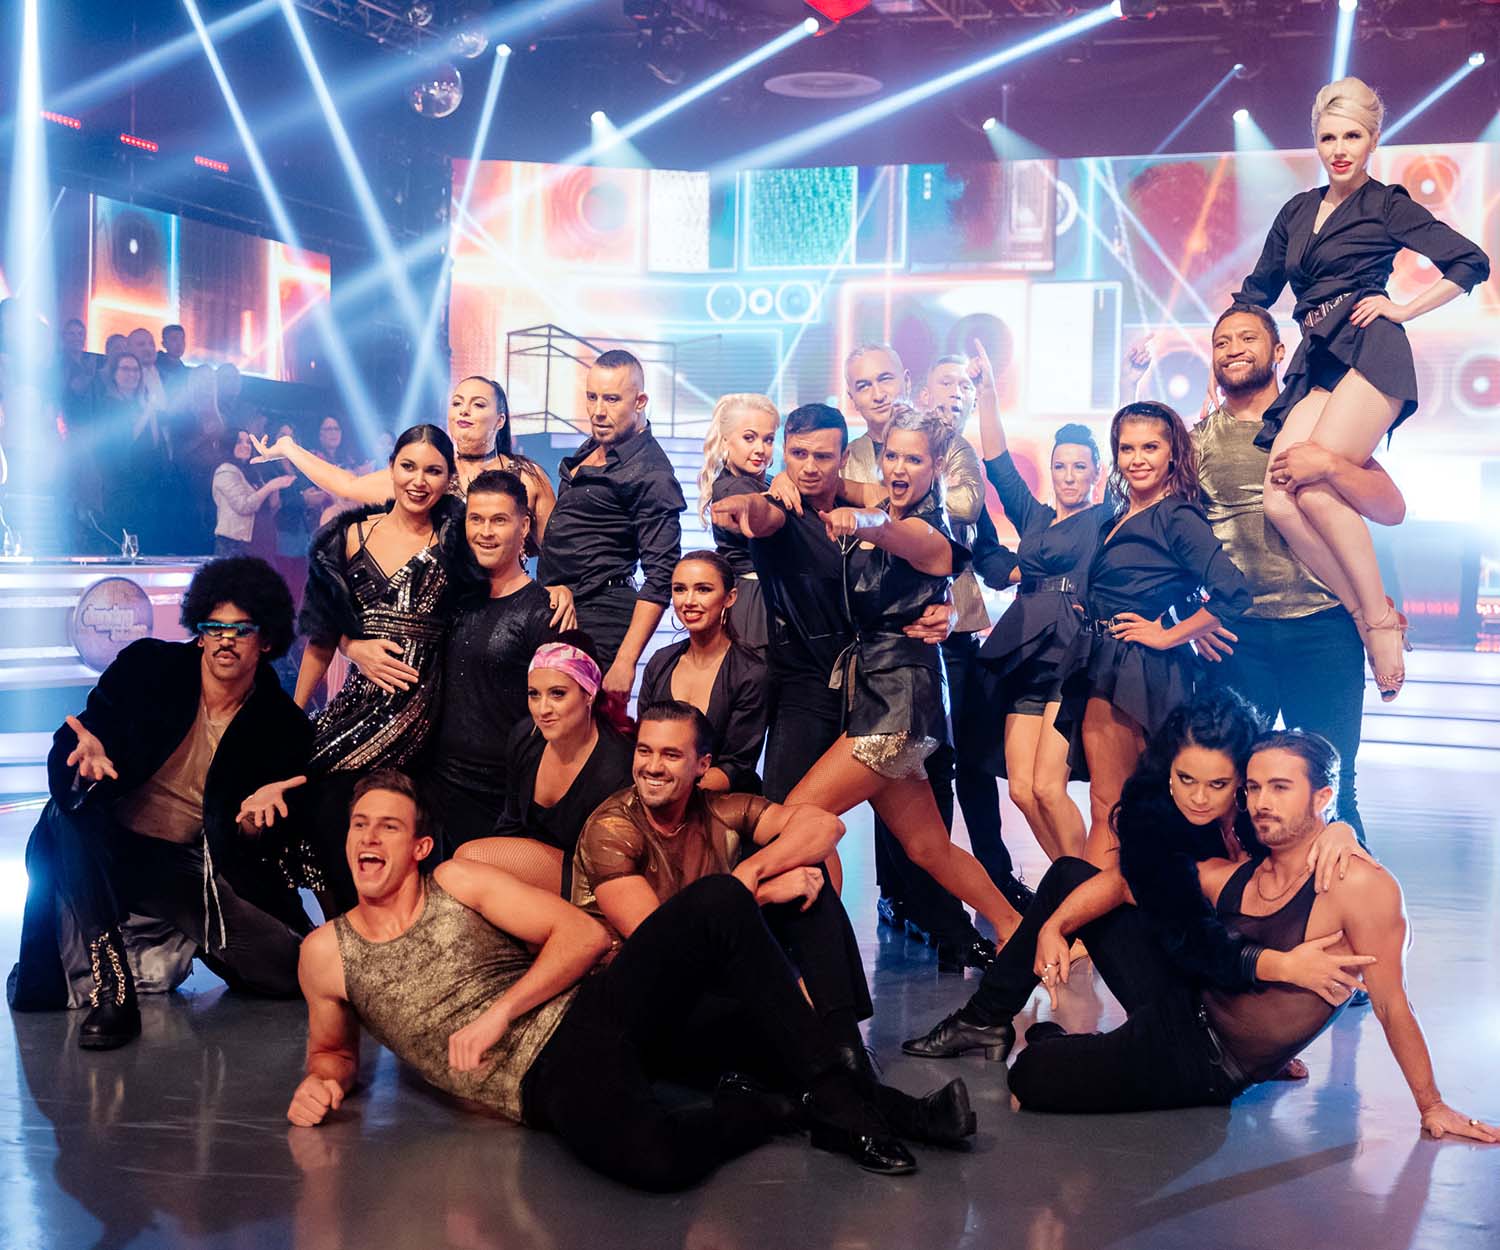 Why Dancing With The Stars is so much more than just an entertainment show